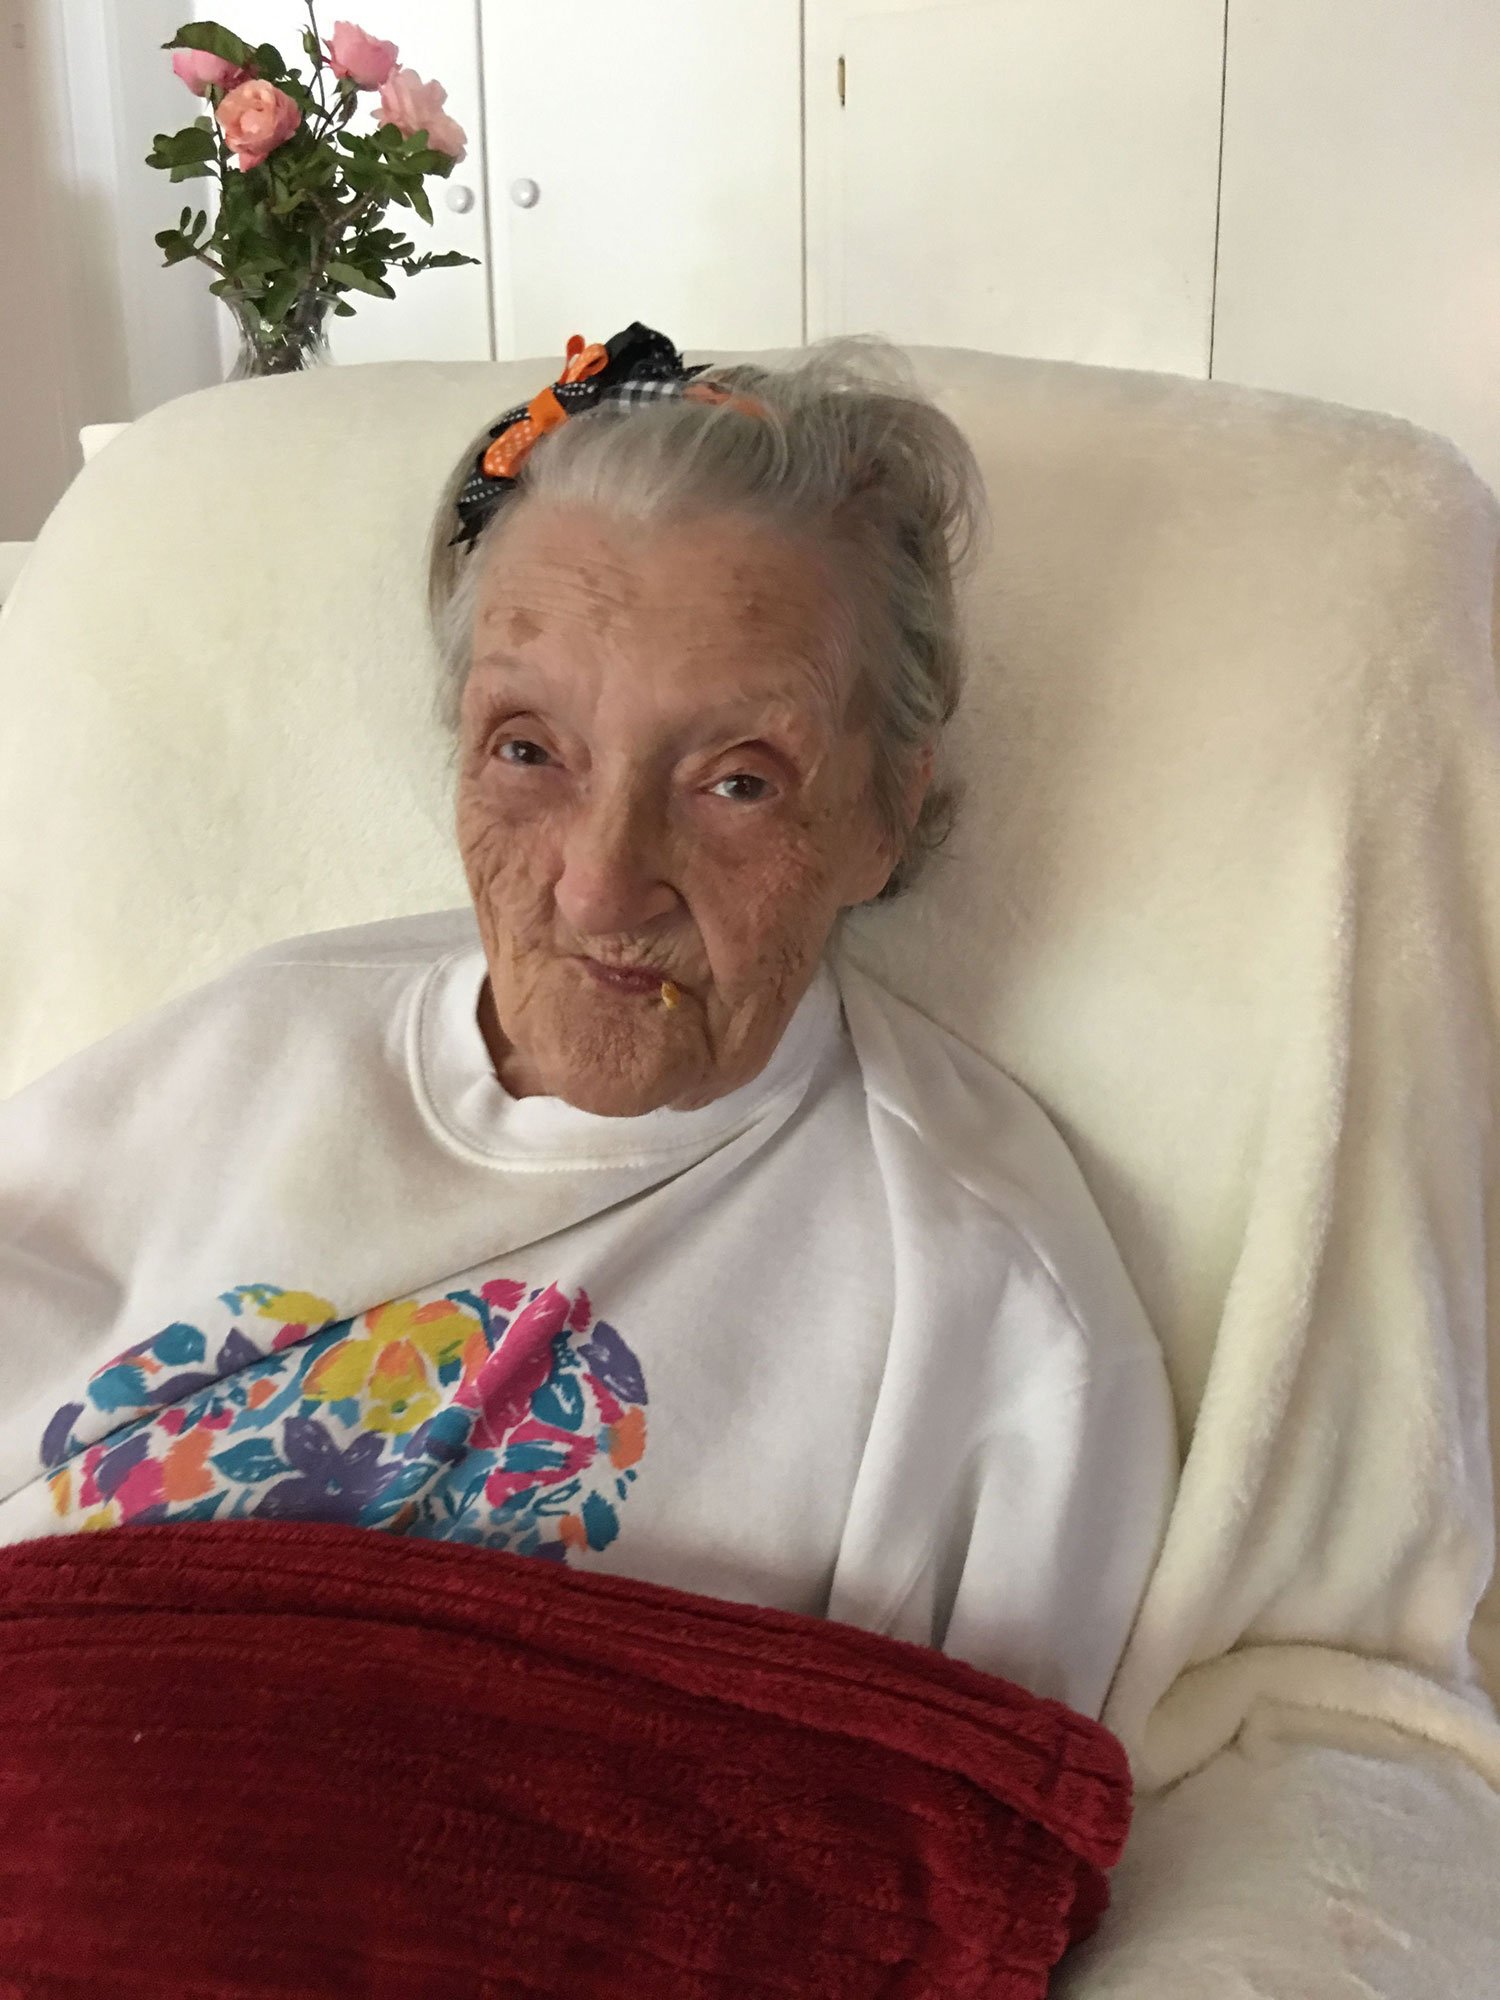 Elaine Geslicki, shown in 2017 at Court Yard Estates care home in Rancho Palos Verdes, Calif., died last year. The cause was sepsis and pneumonia, according to her death certificate.